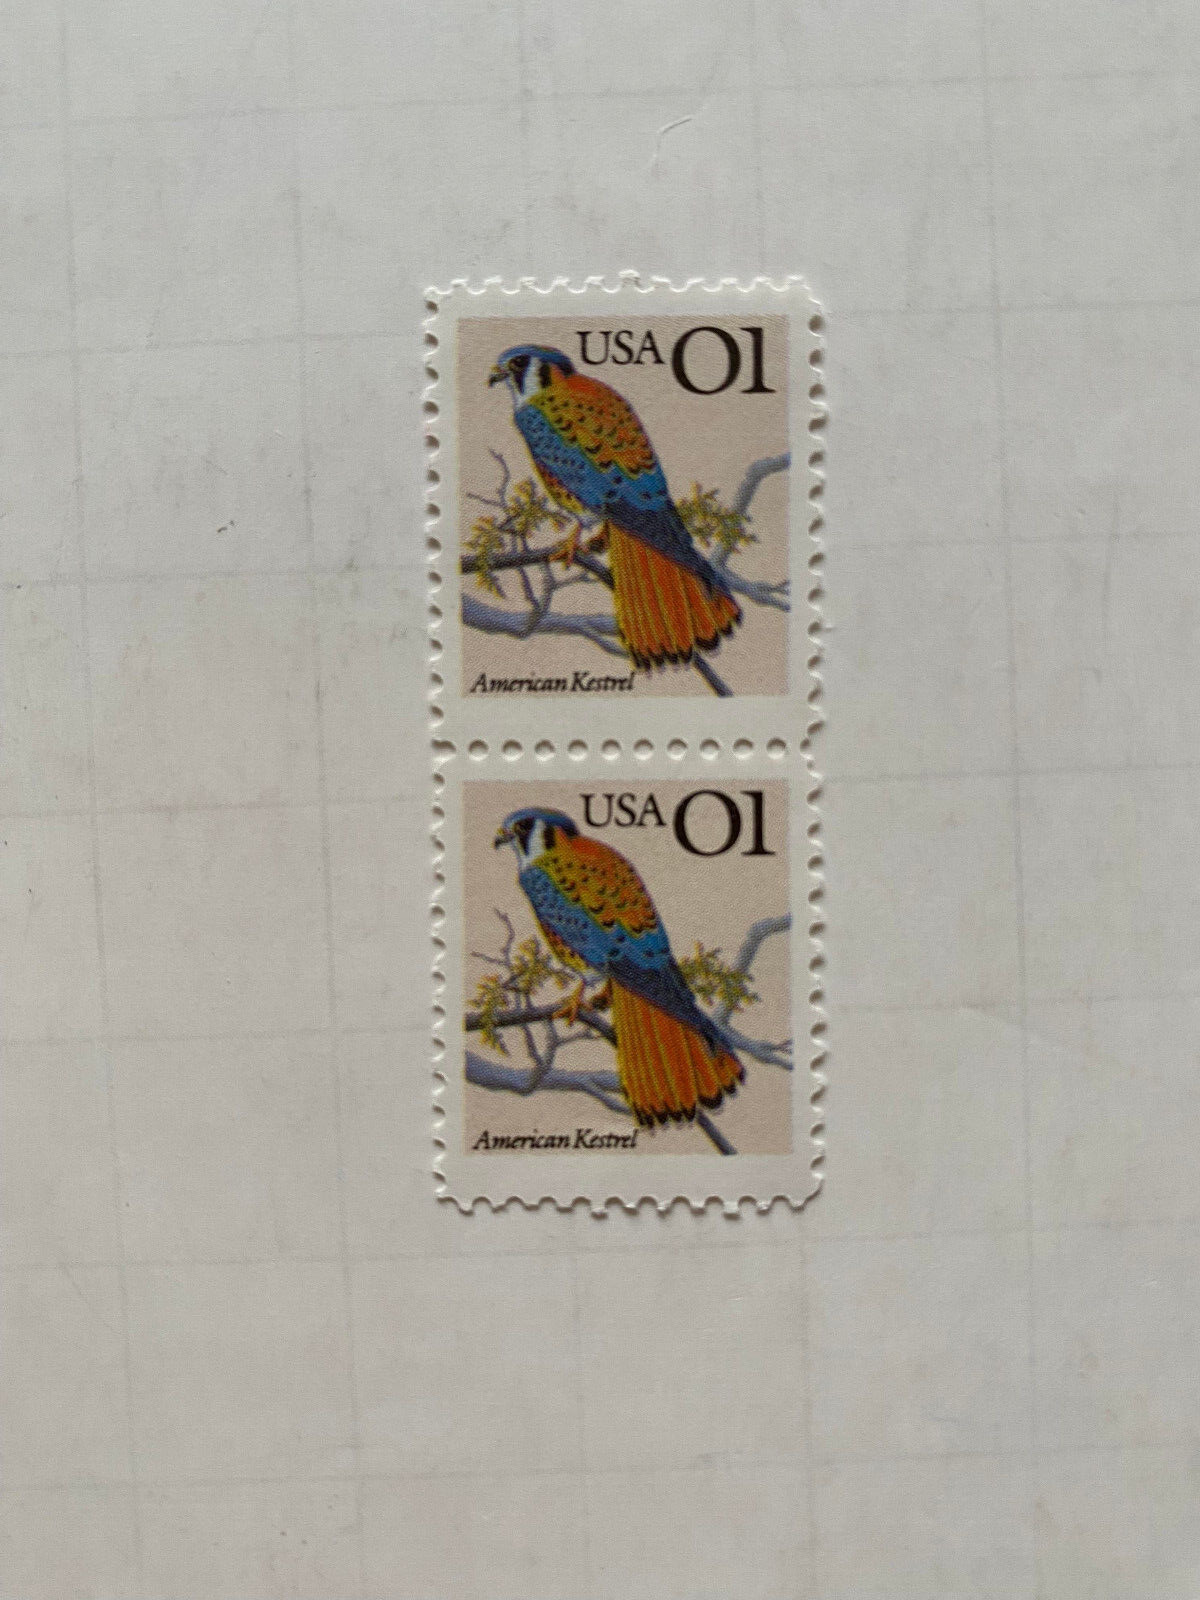 2 stamps : USA 1-Cent American Kestrel Bird USPS Postage Collect US unused NEW